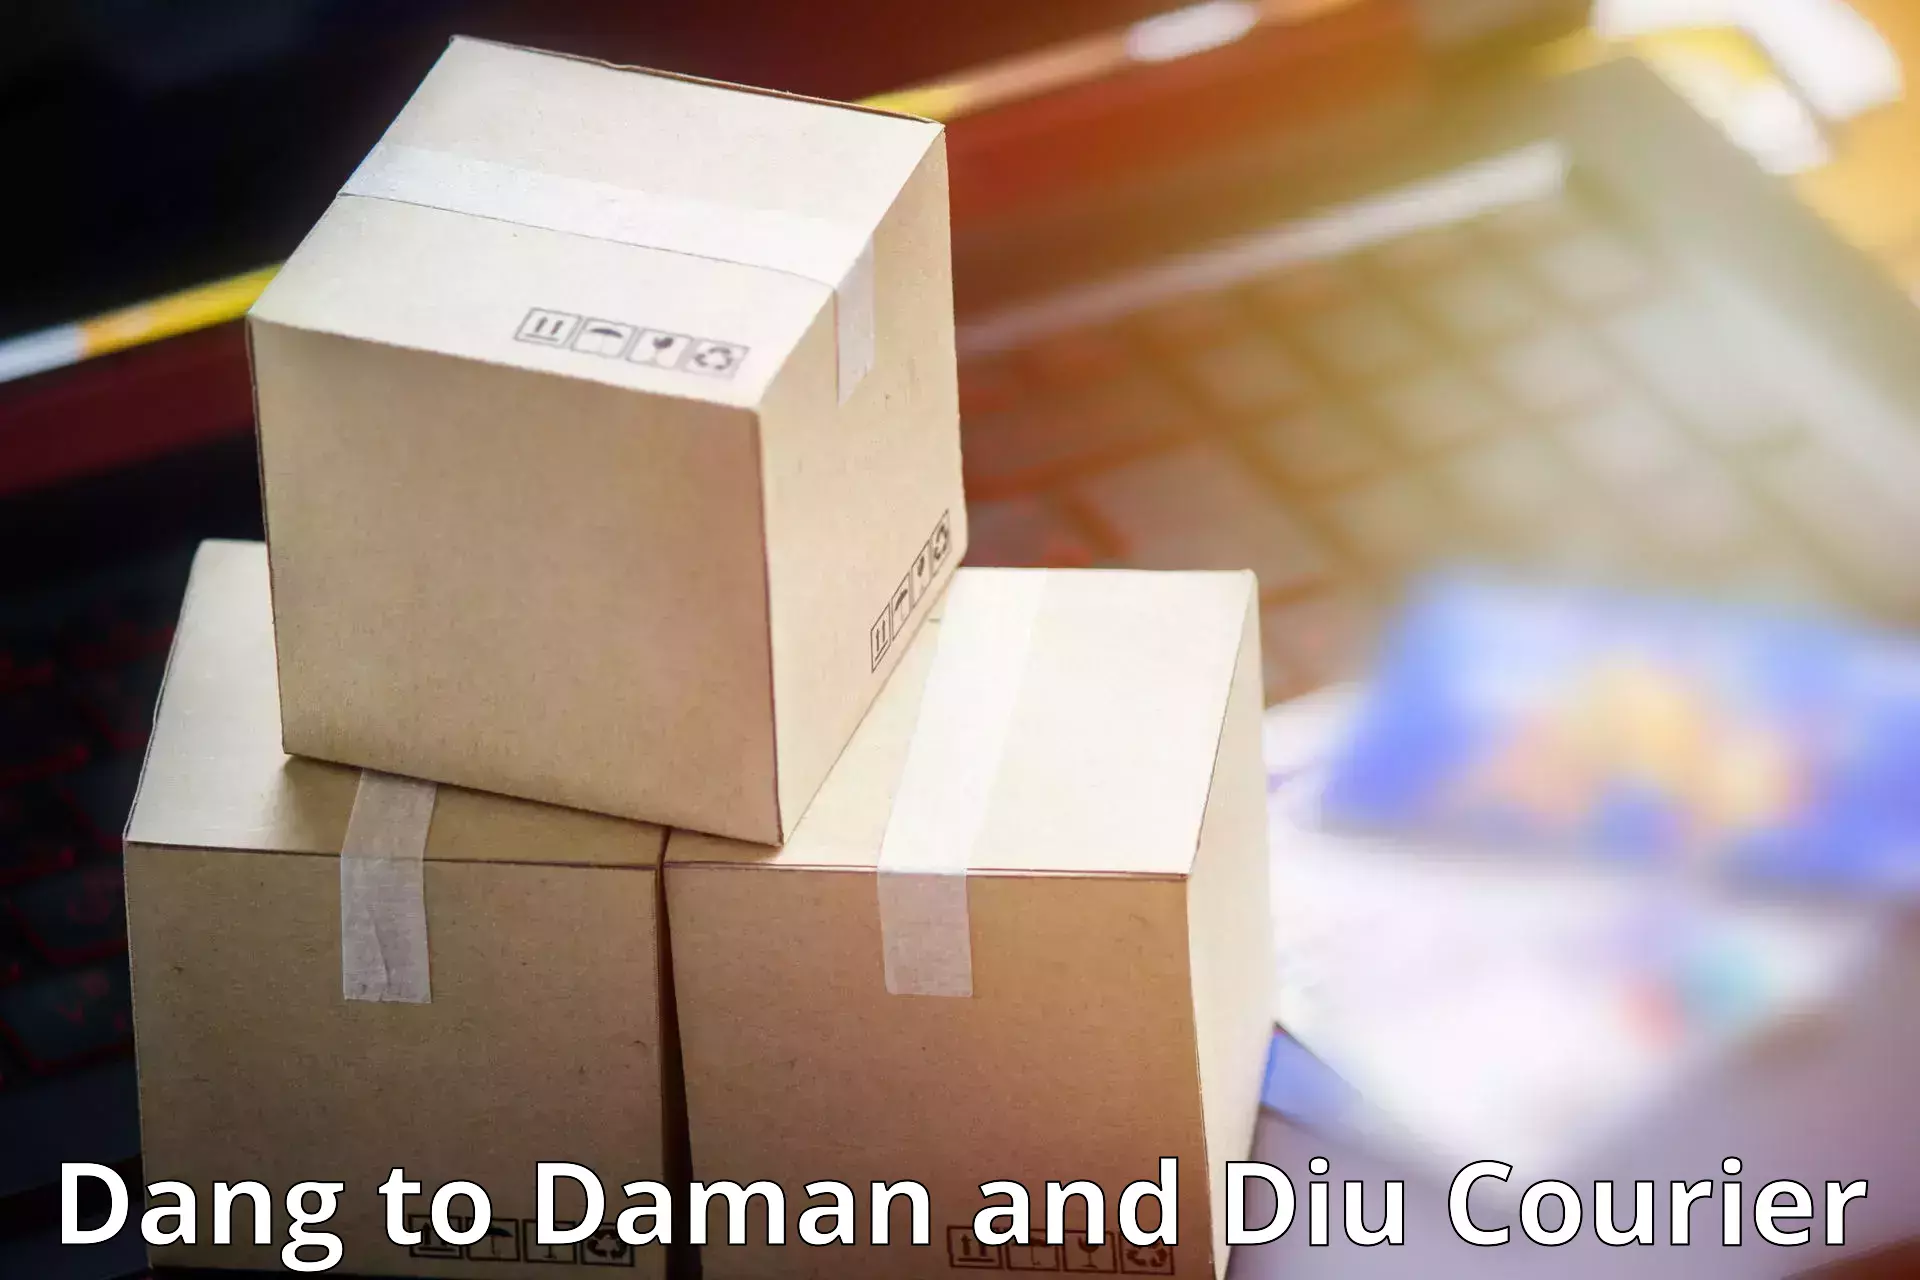 Automated parcel services Dang to Daman and Diu